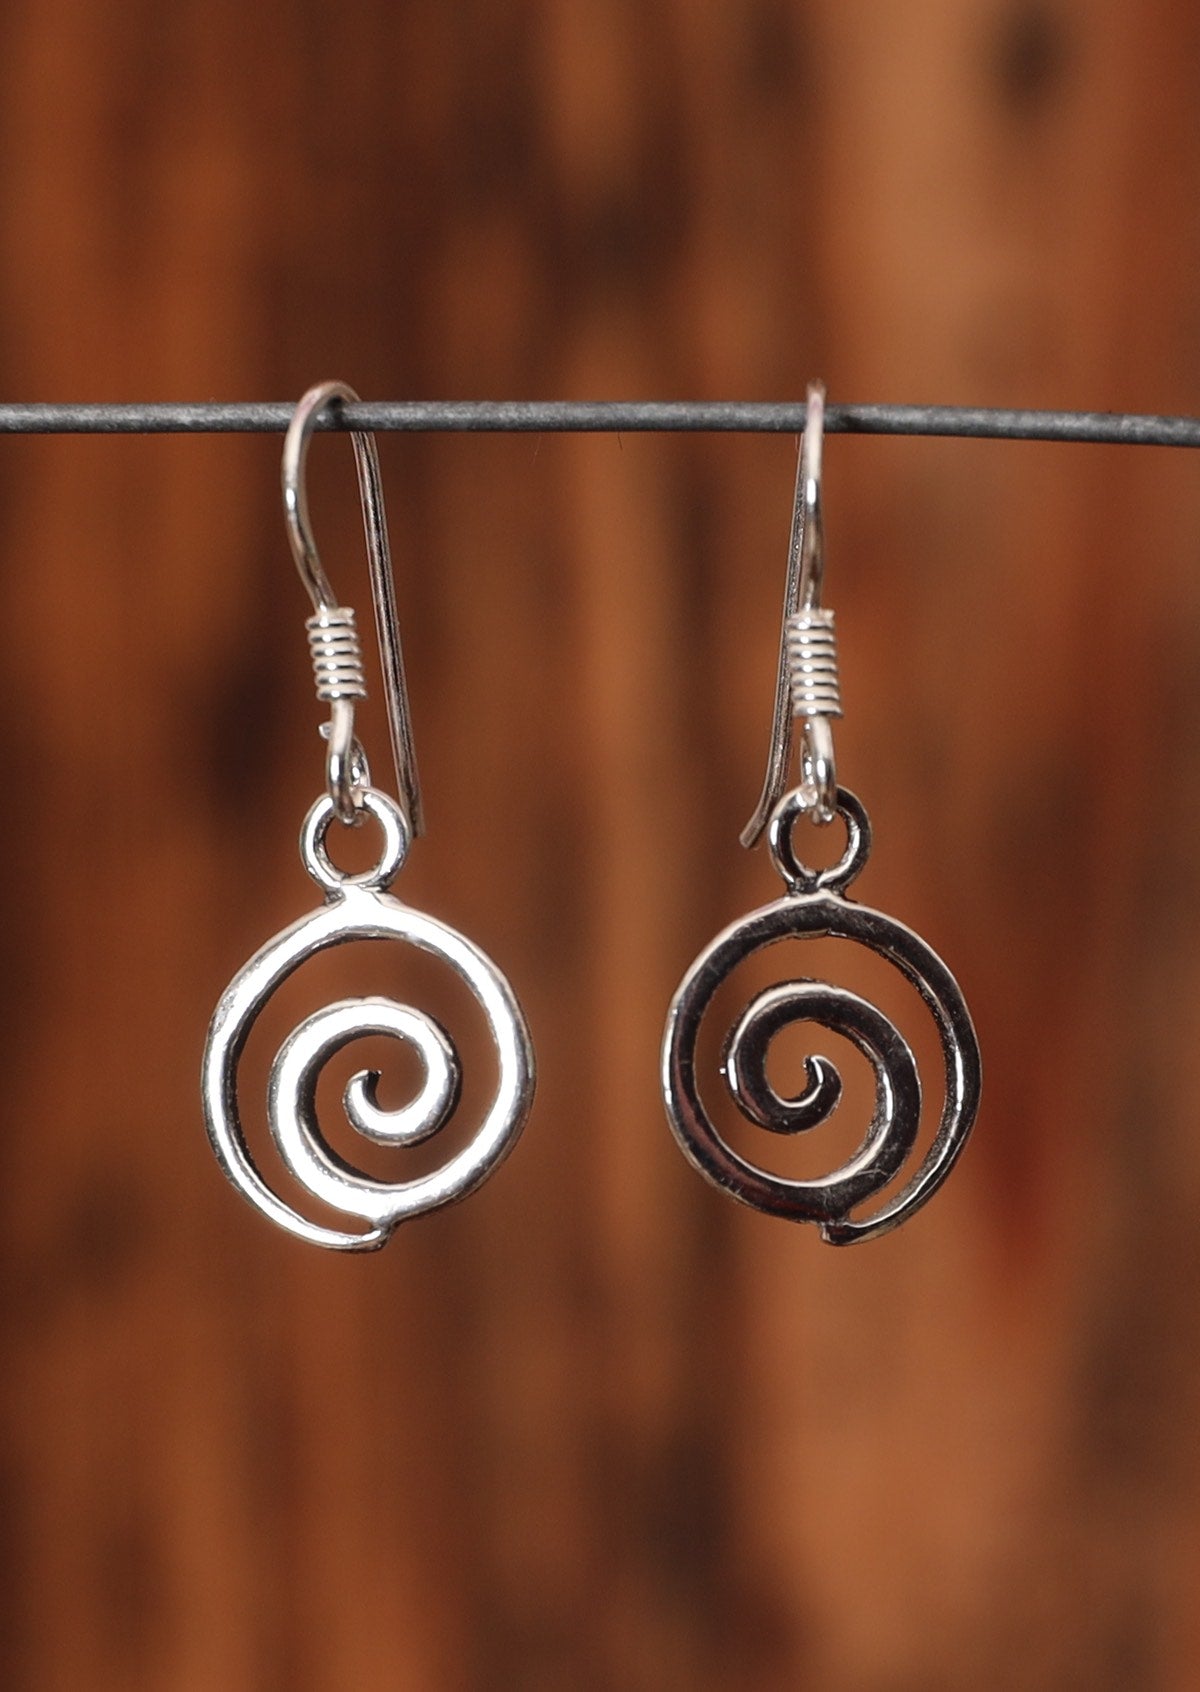 92.5% silver spiral earrings with a hook on wire for display.